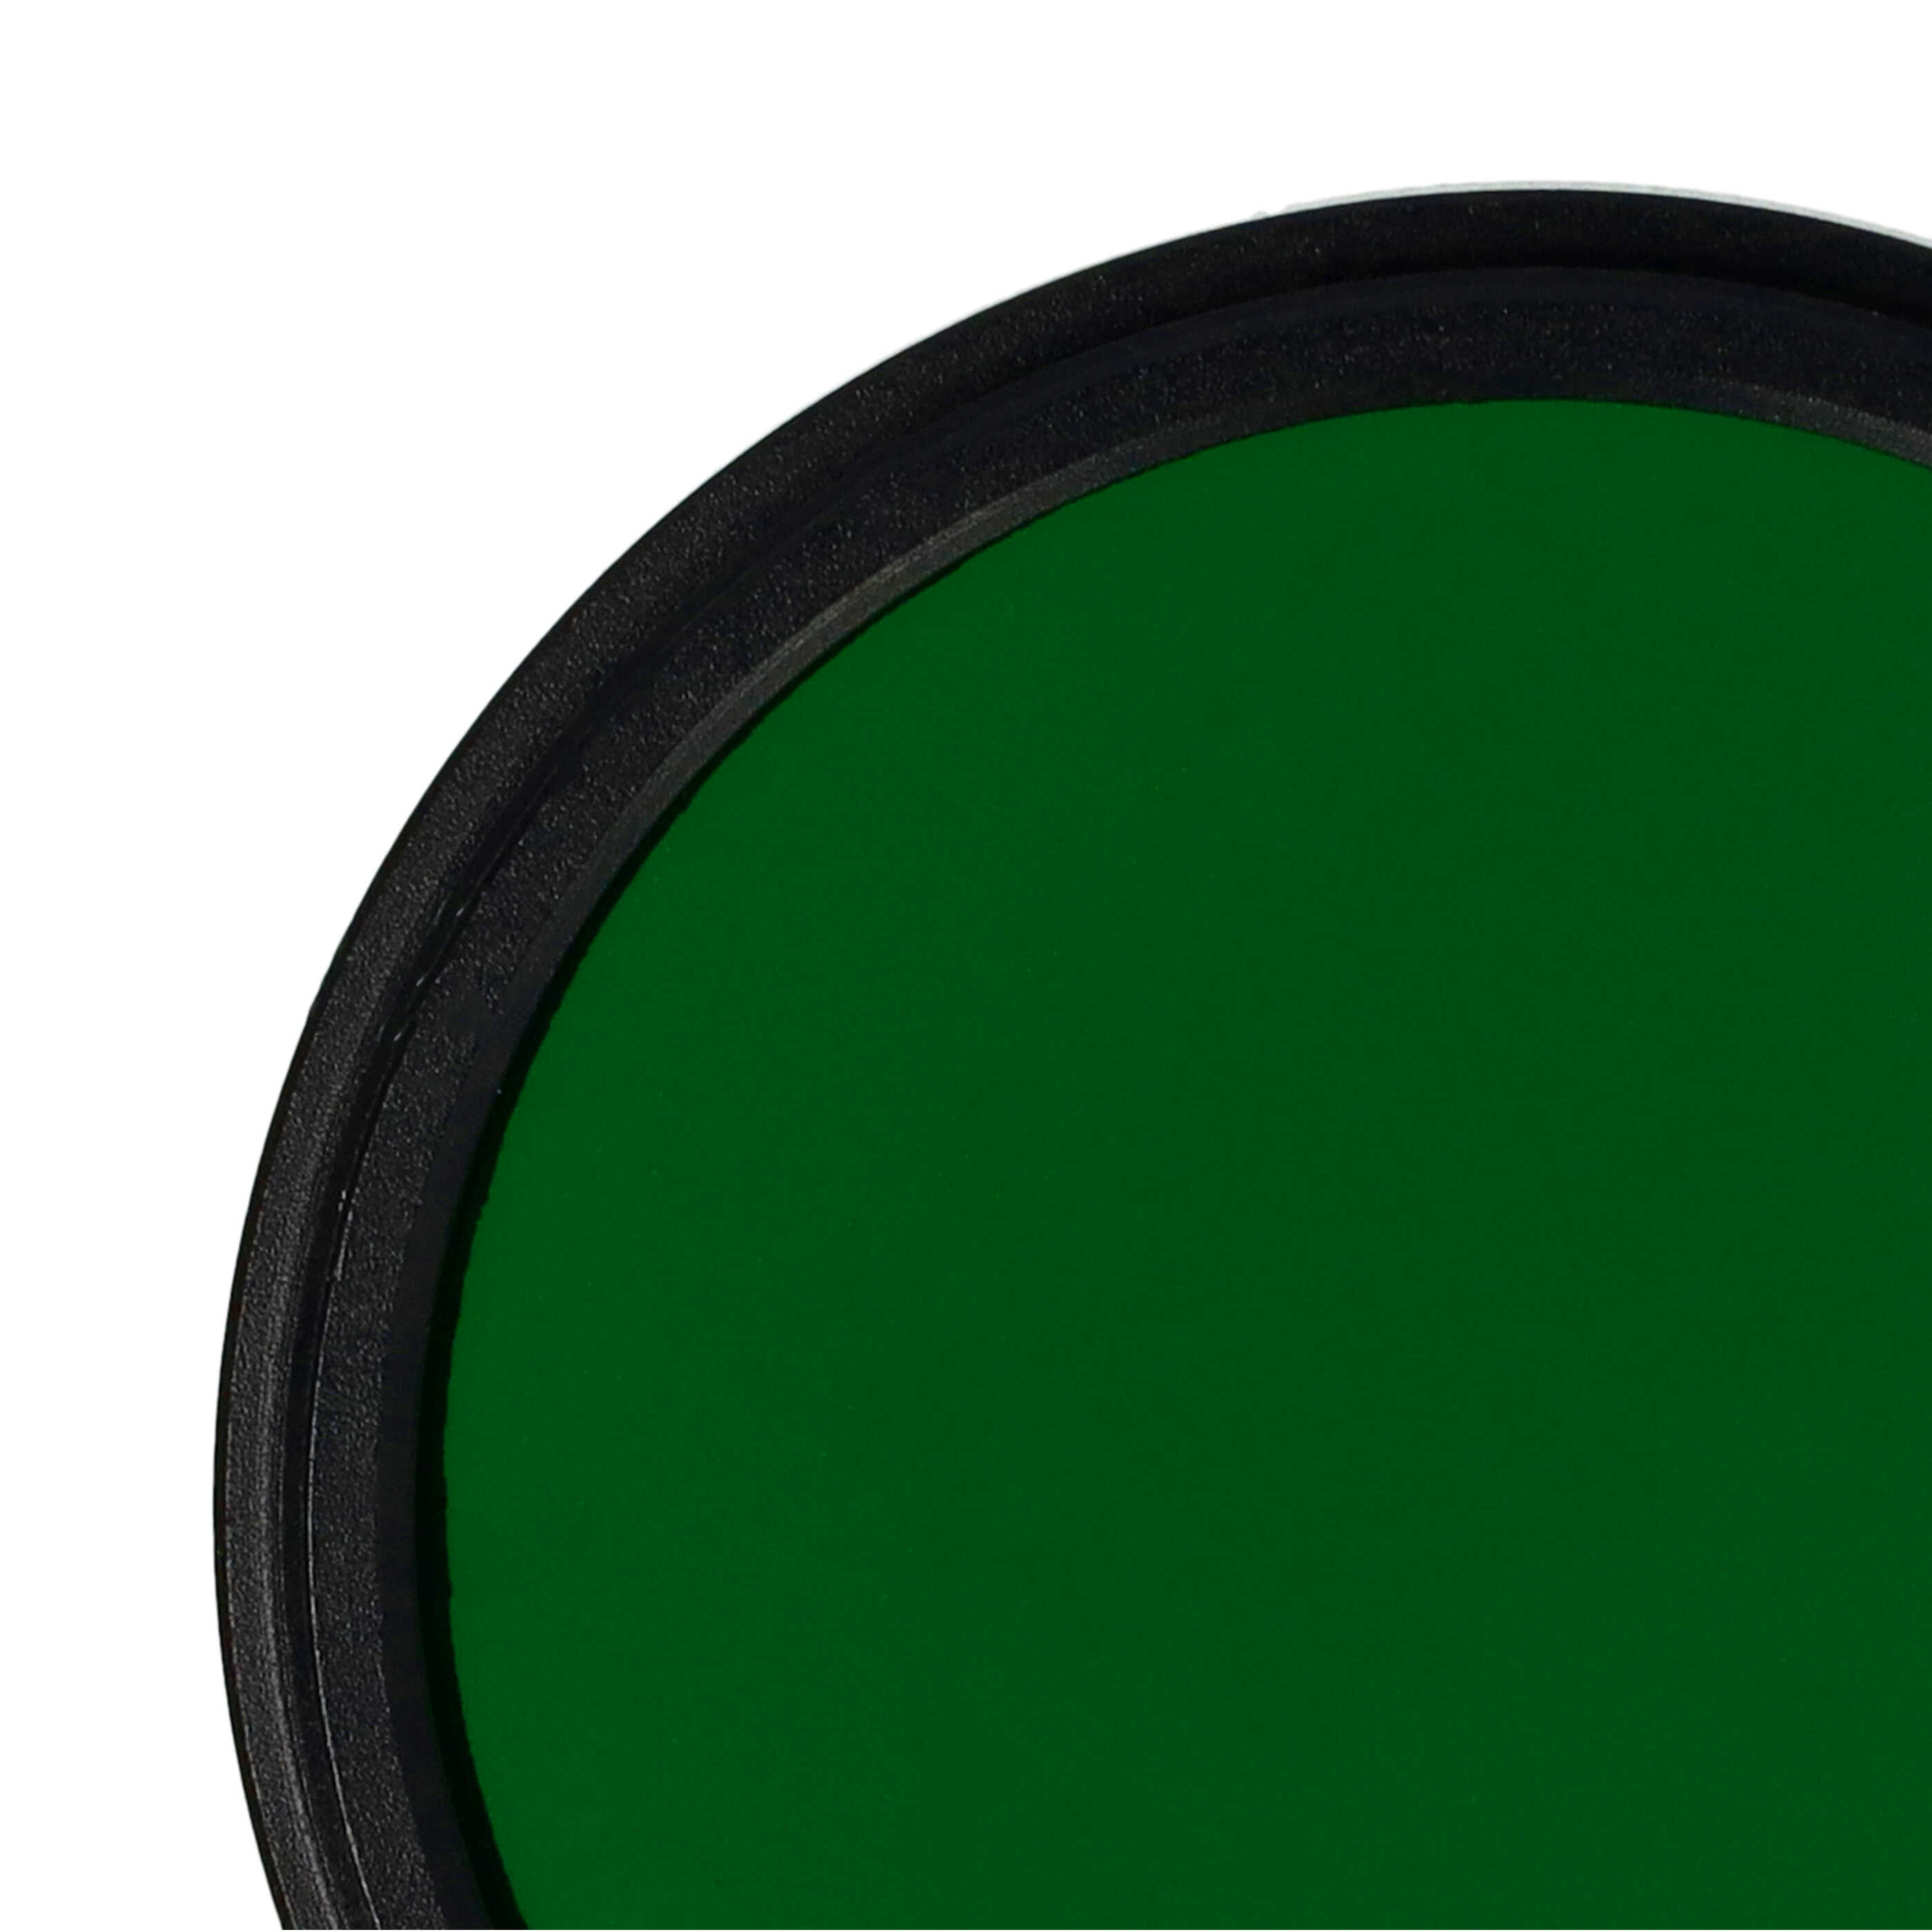 Coloured Filter, Green suitable for Camera Lenses with 43 mm Filter Thread - Green Filter